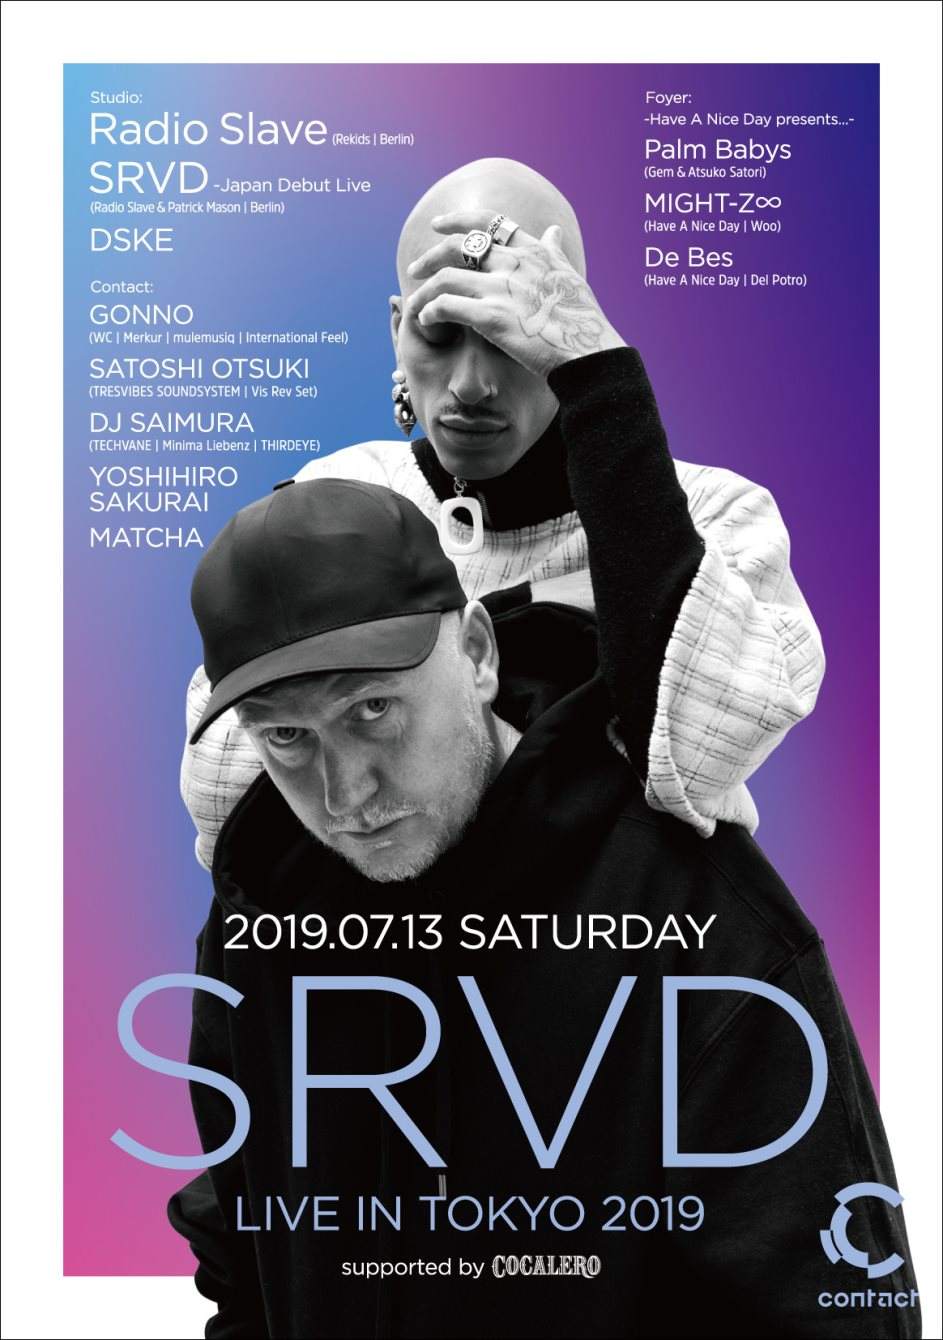 Srvd Live in Tokyo 2019 - フライヤー表